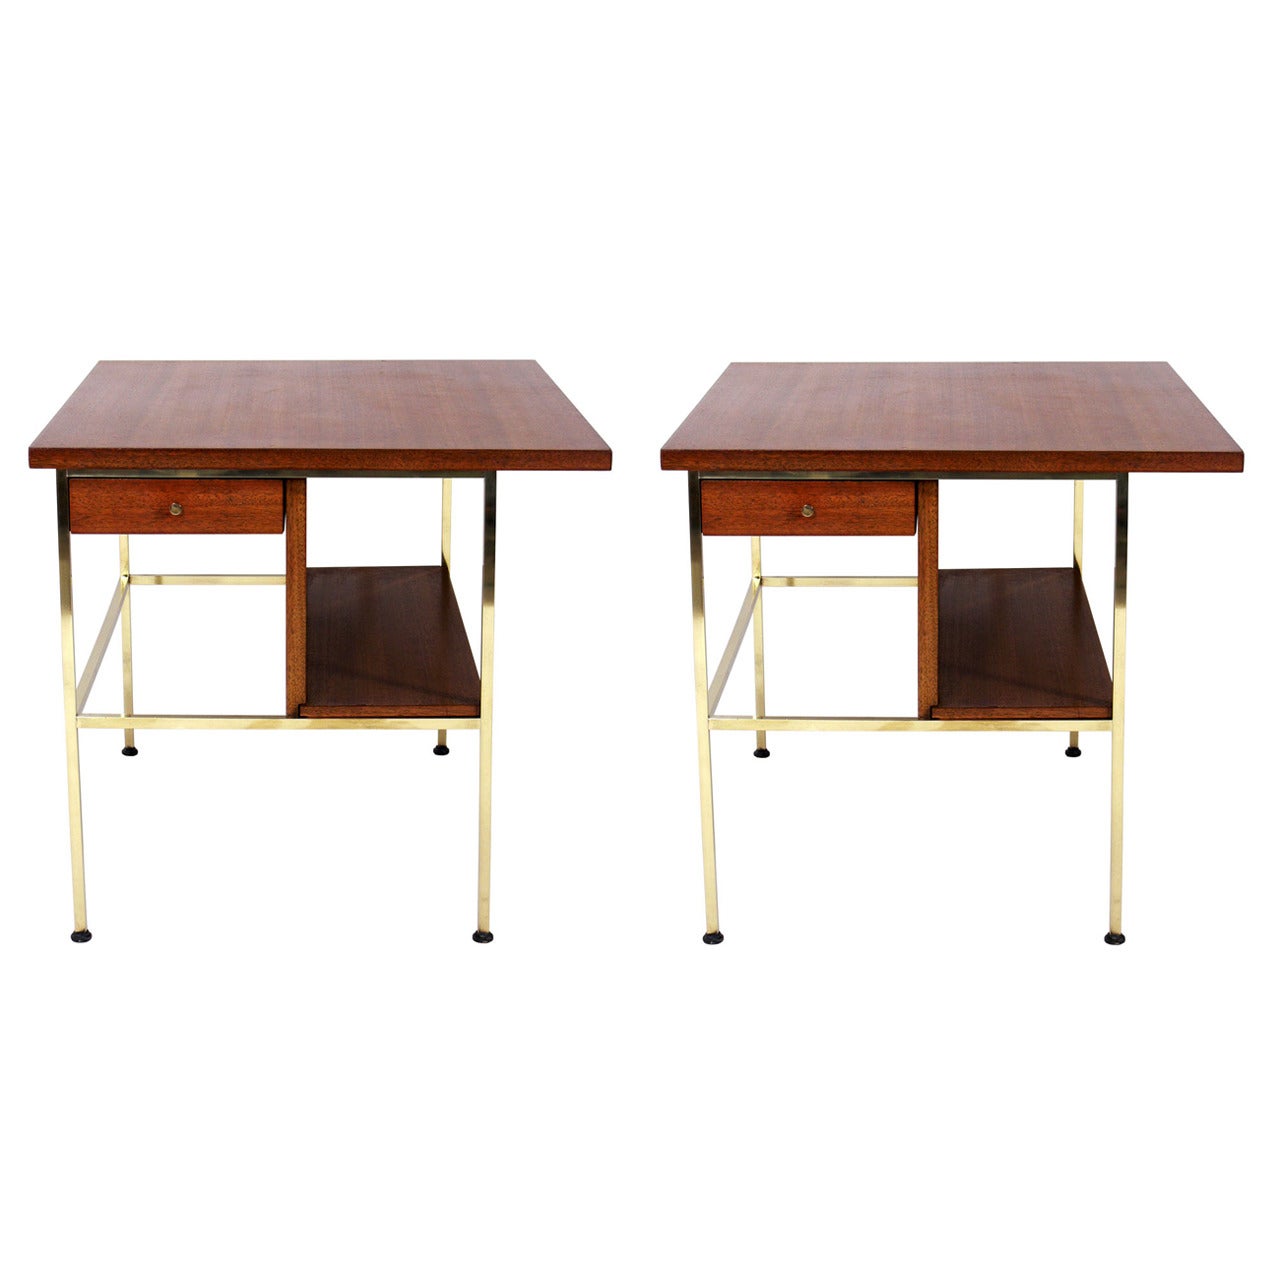 Pair of Modernist Nightstands or End Tables by Paul McCobb